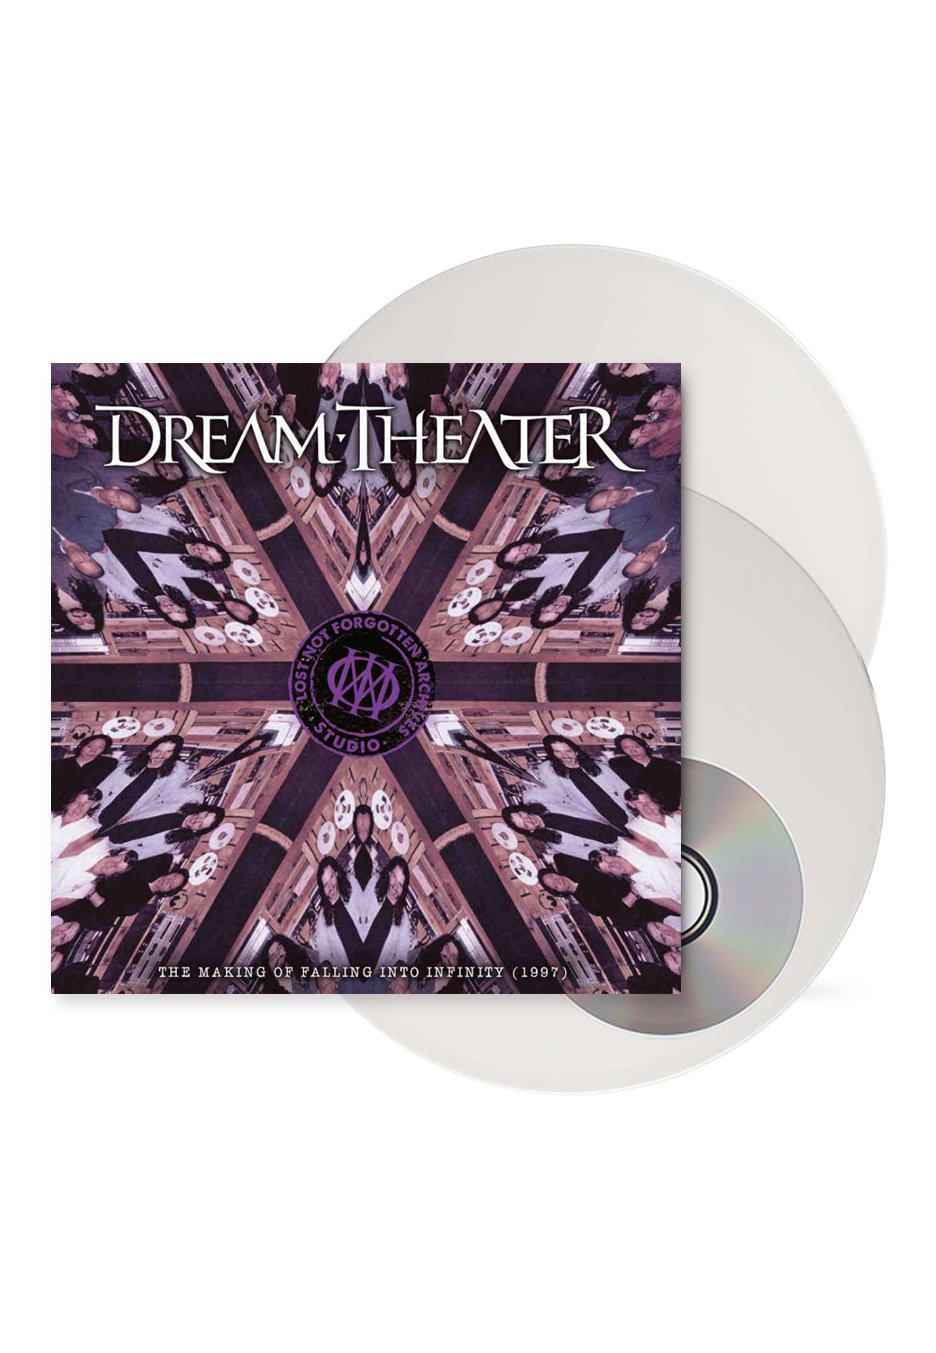 Dream Theater - Lost Not Forgotten Archives: The Making of Falling Into Infinity (1997) White - Colored 2 Vinyl + CD 